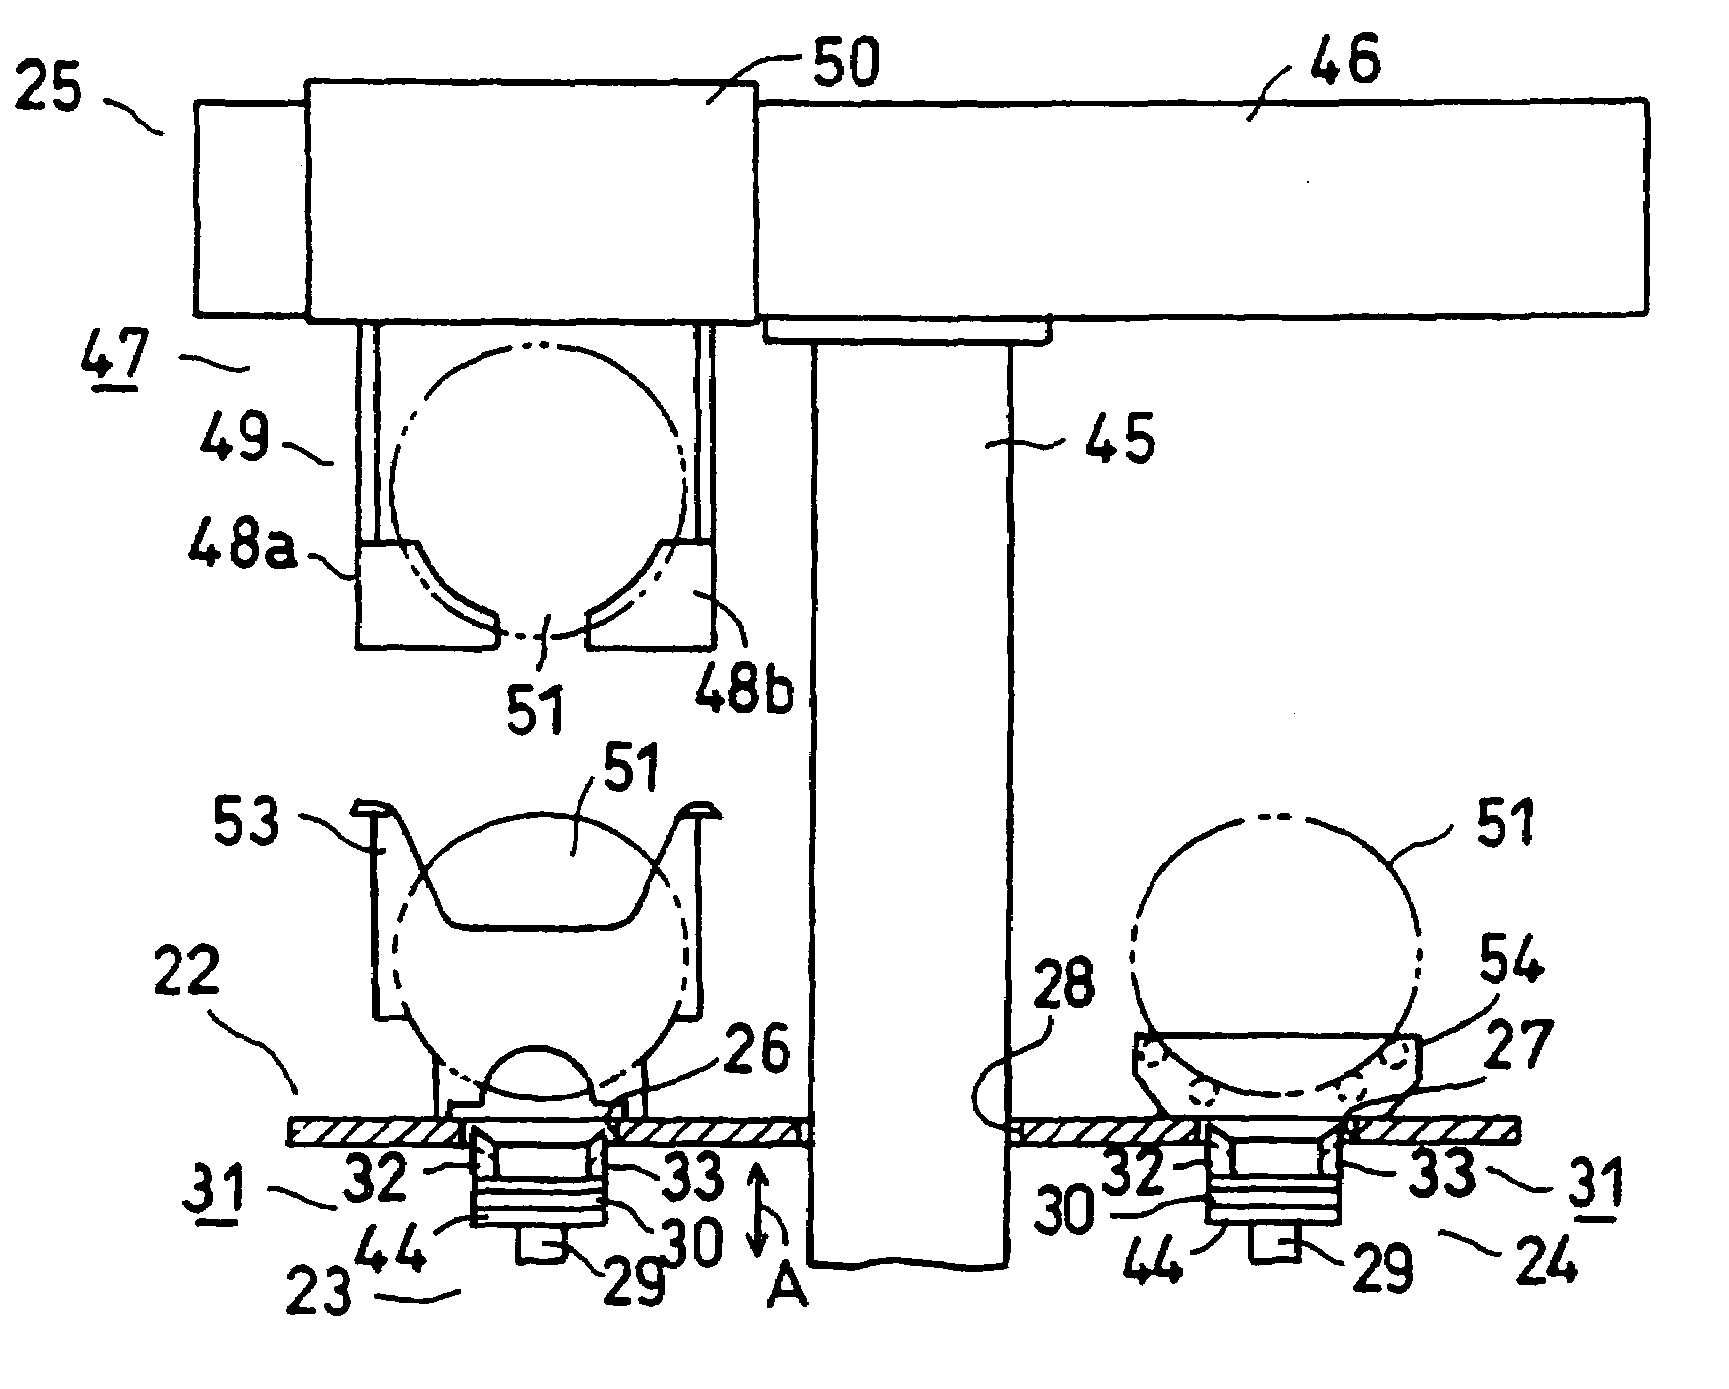 Wafer transfer equipment and semiconductor device manufacturing apparatus using wafer transfer equipment